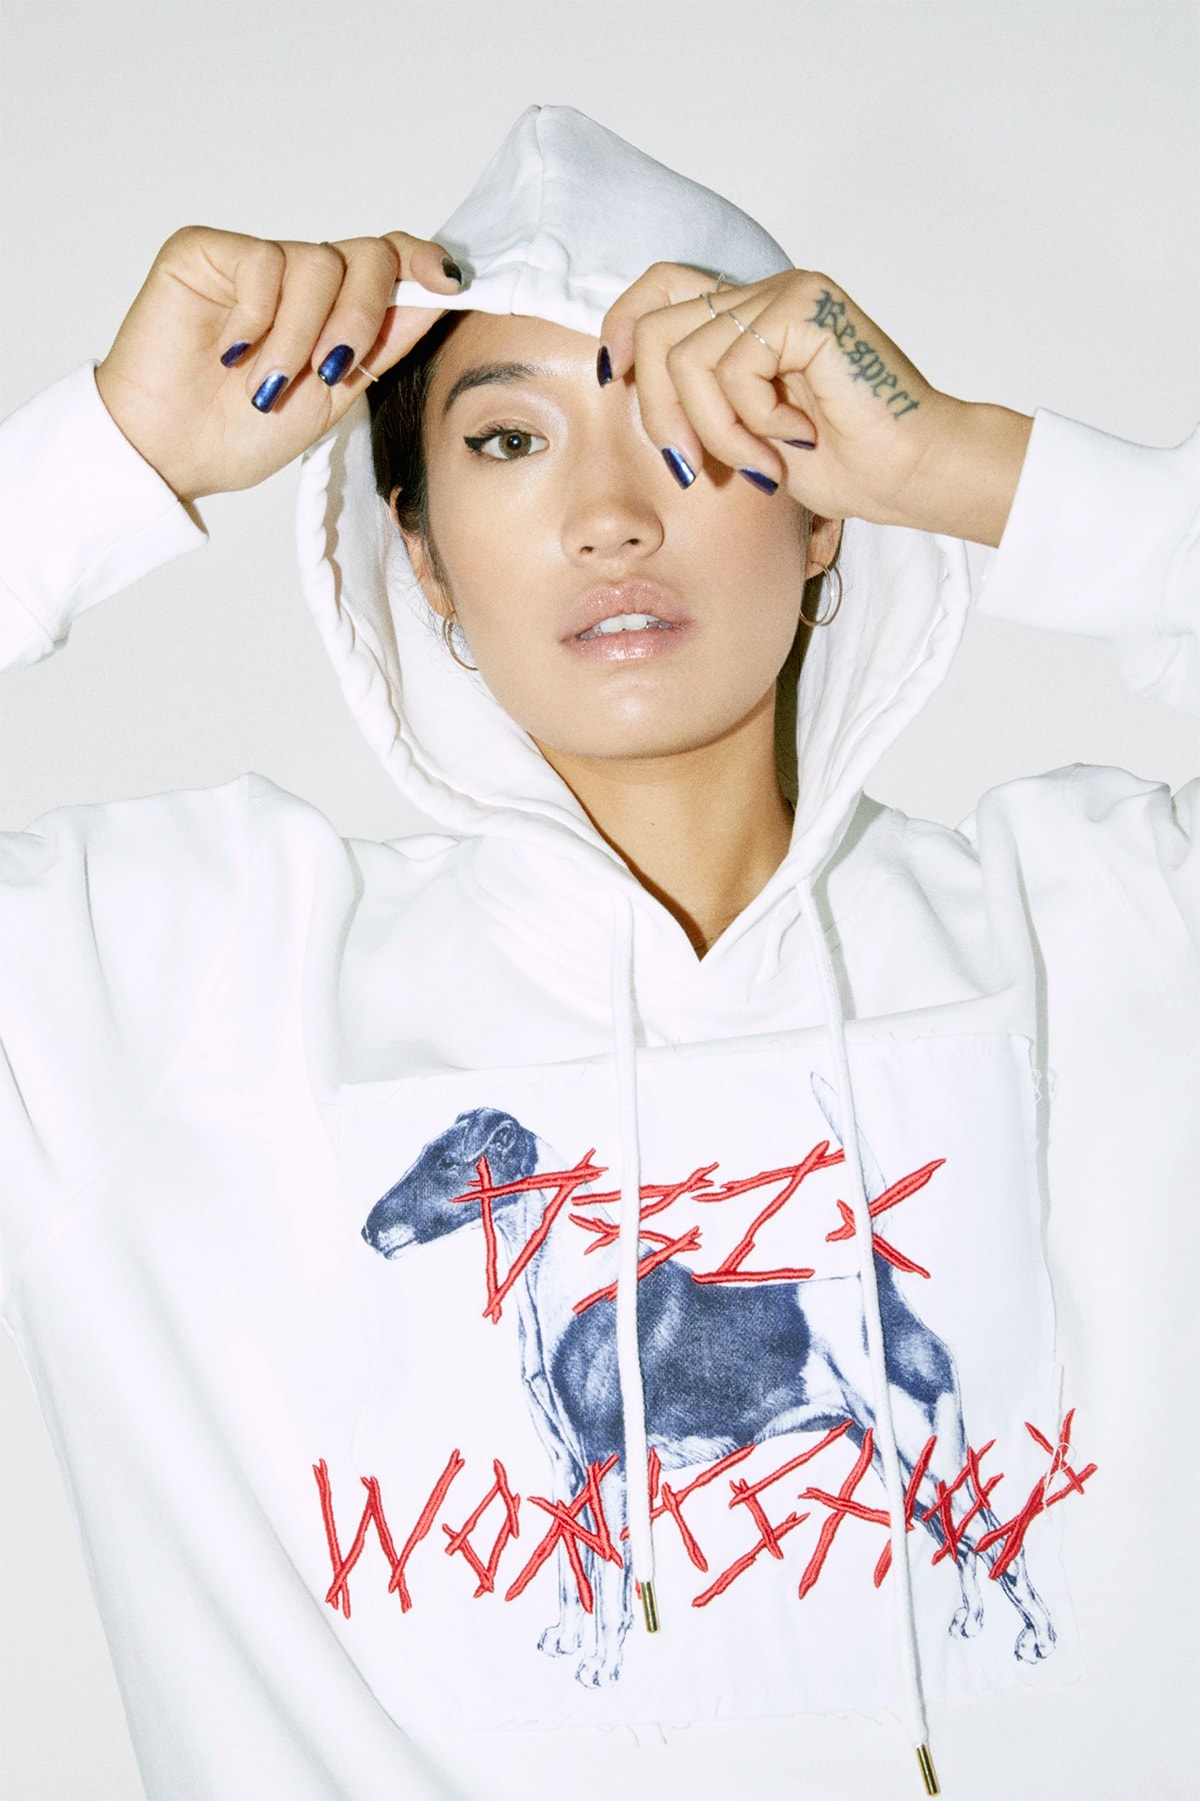 Peggy Gou wants to see you wearing PJs in the club